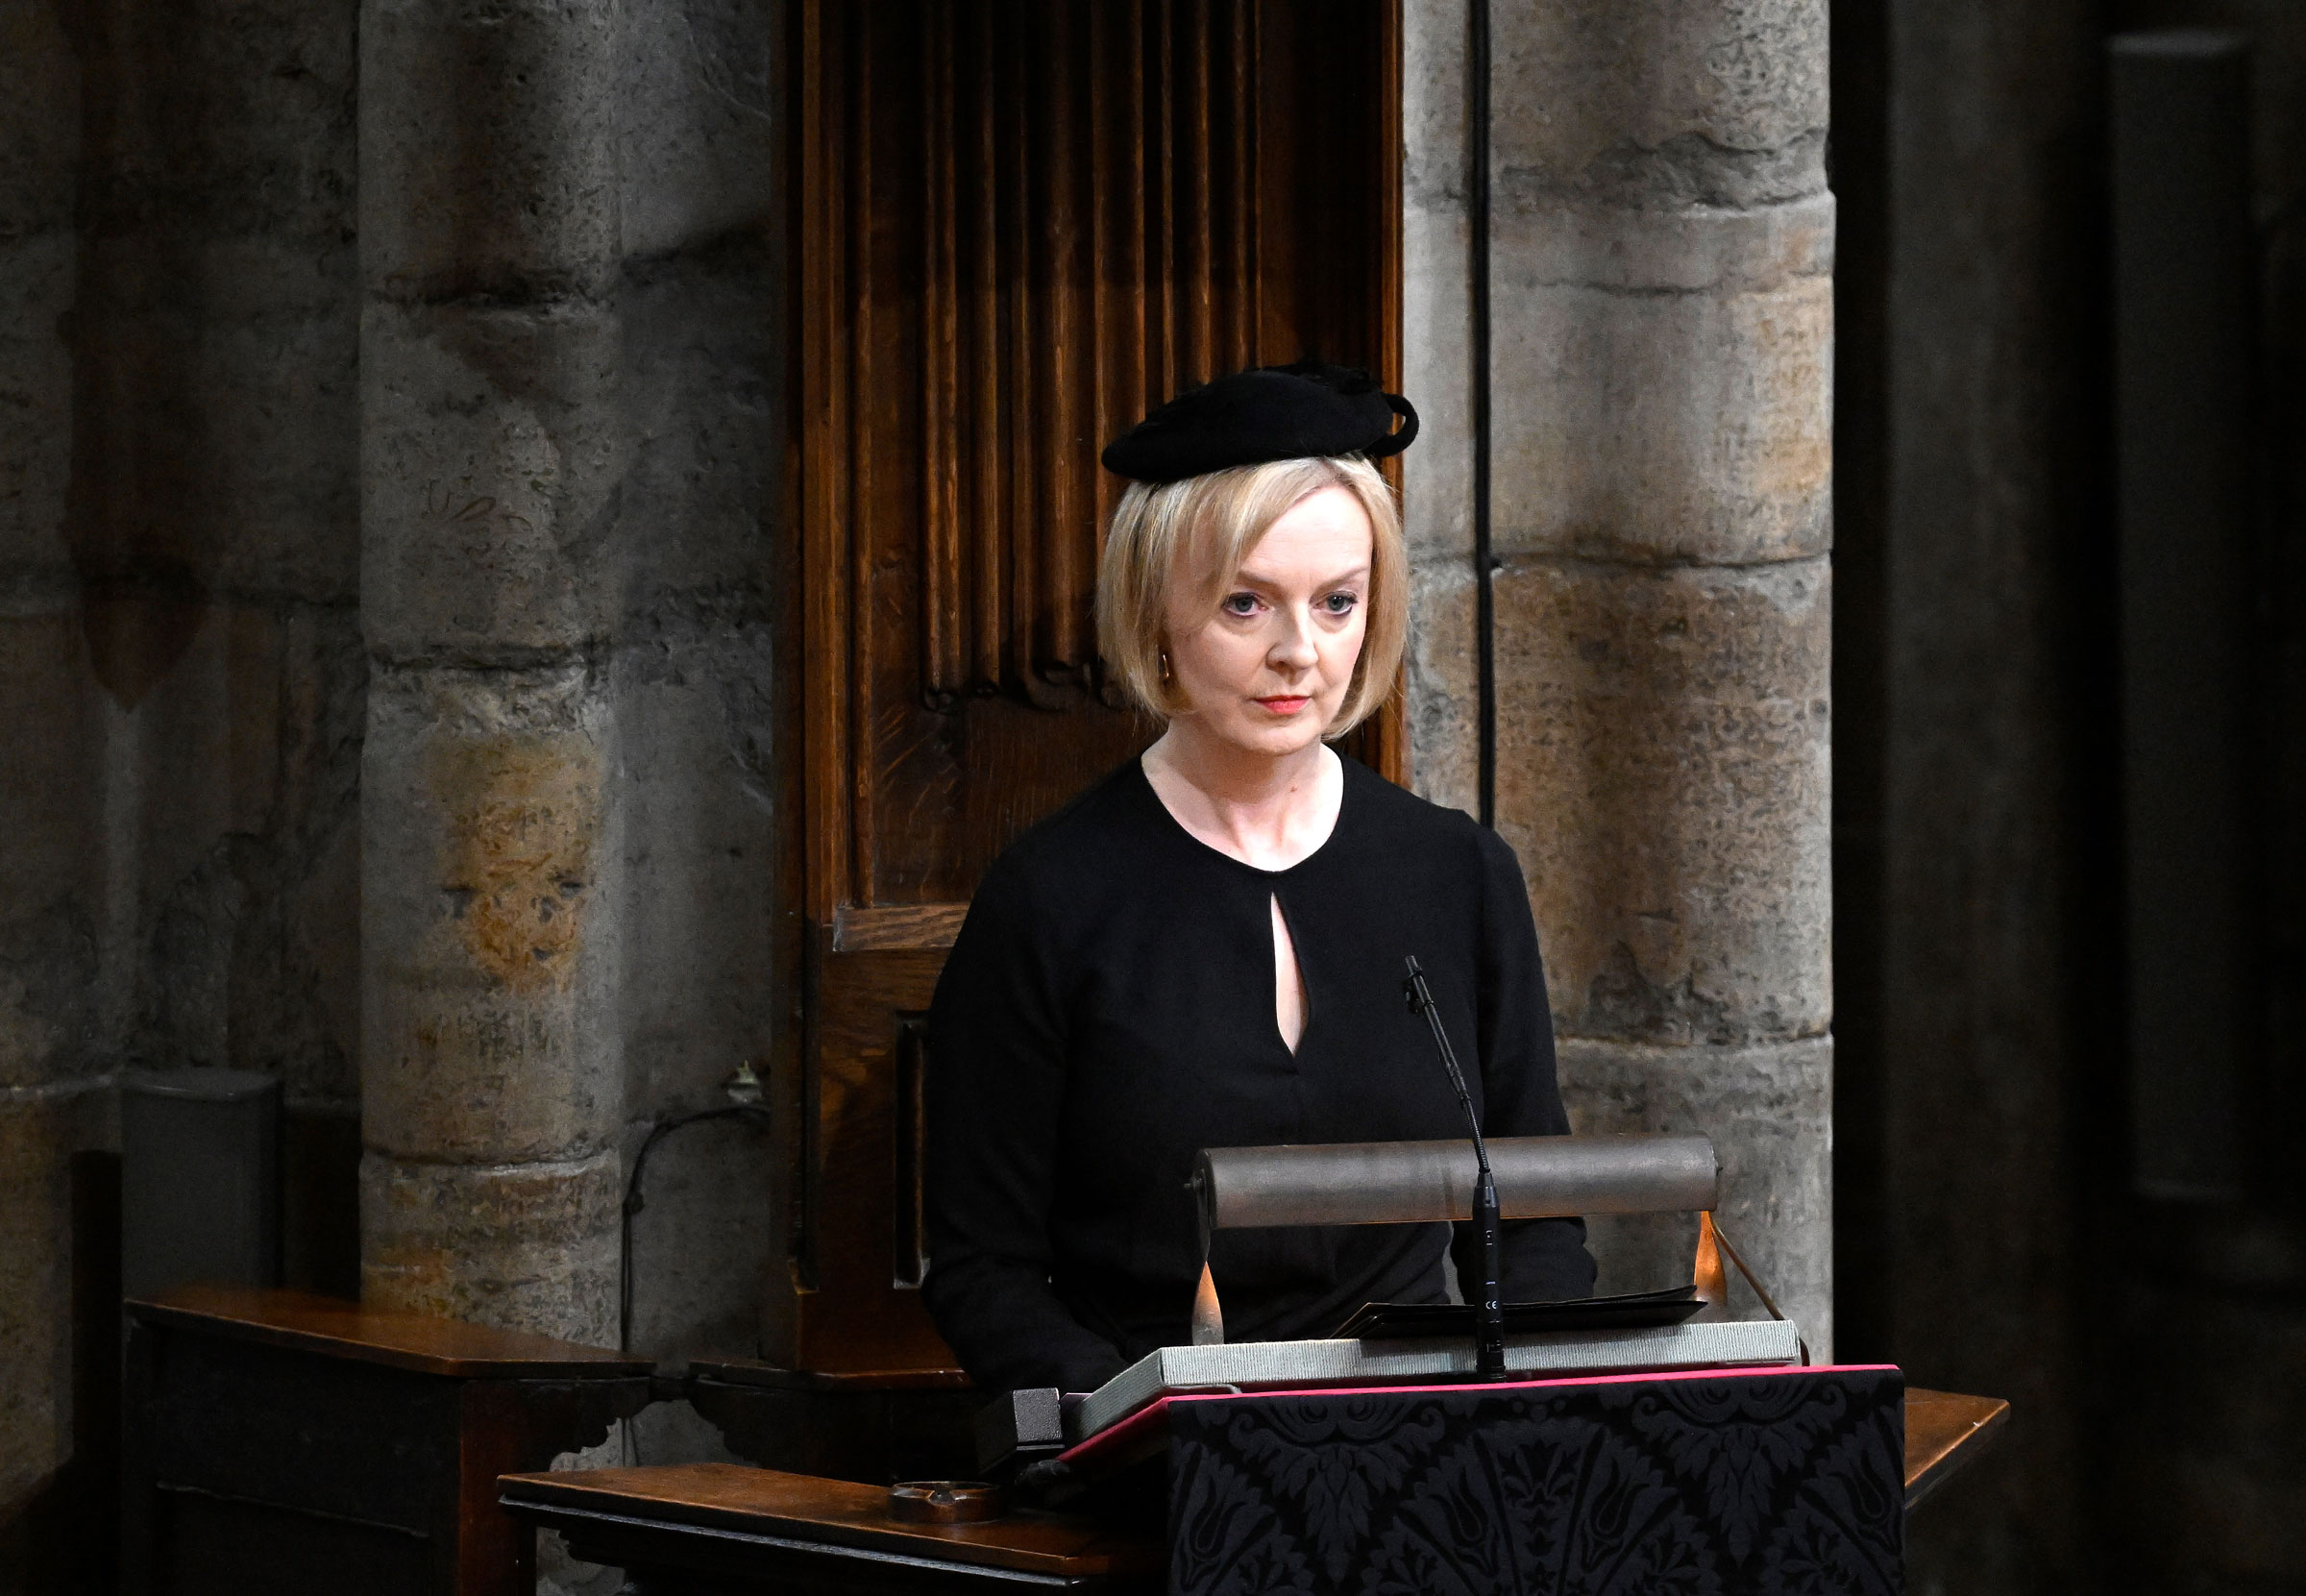 U.K. Prime Minister Liz Truss delivers a reading during The State Funeral of Queen Elizabeth II at Westminster Abbey on Sept. 19, 2022 in London. (Gareth Cattermole—Getty Images)